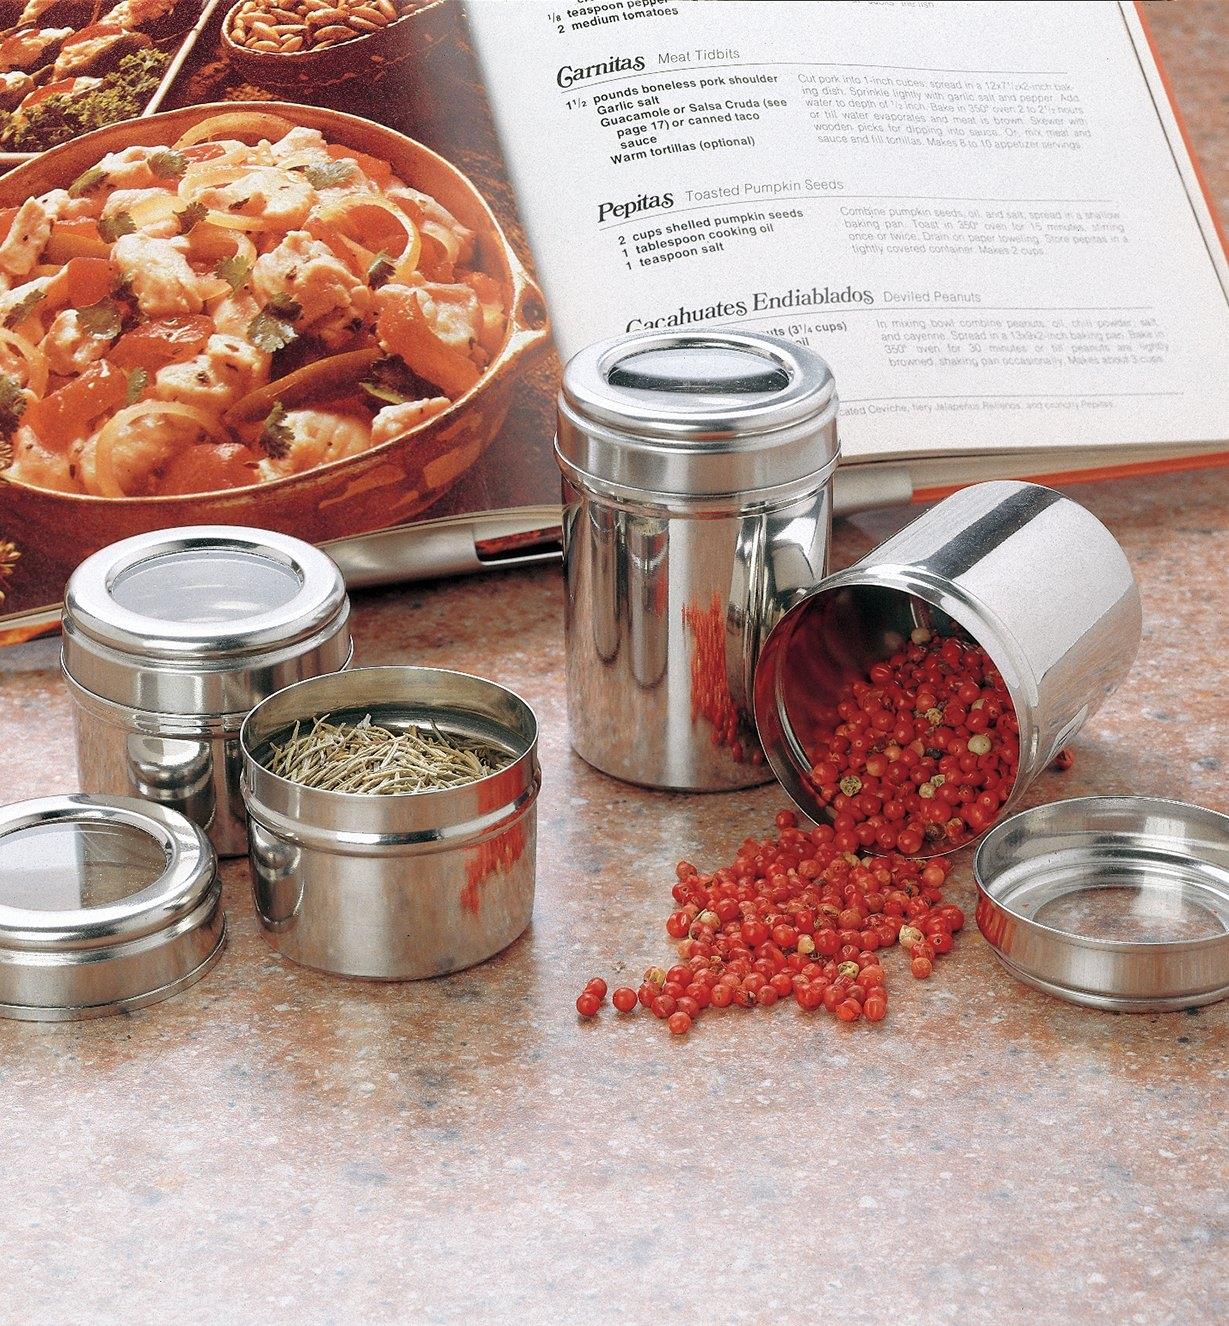 Large and small canisters holding spices